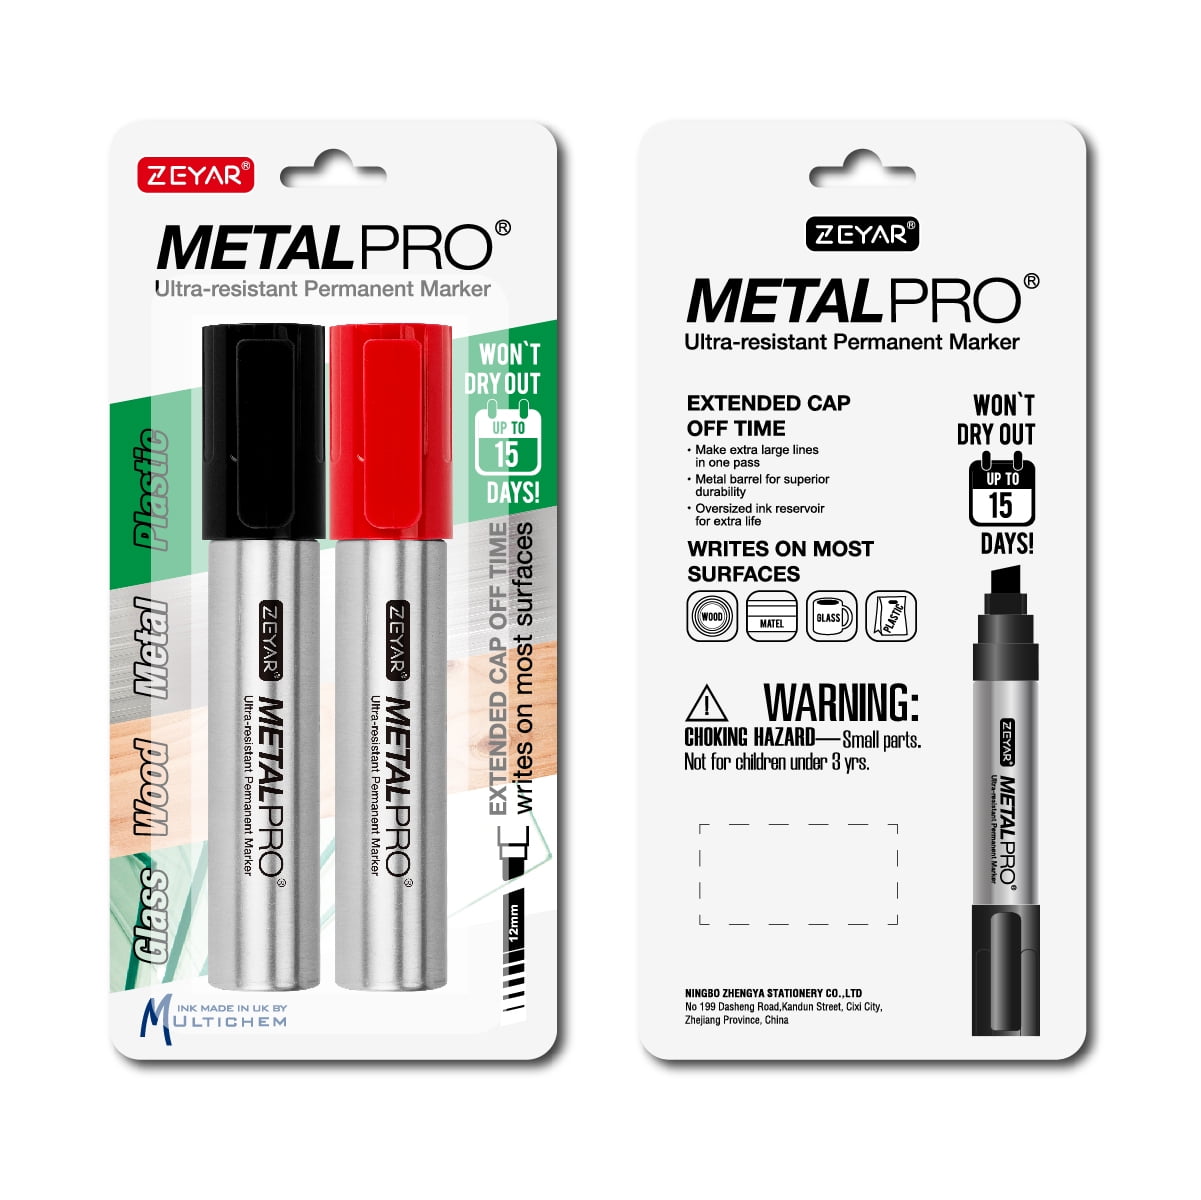 WHITE PAINT PEN MARKER Permanent RUBBER Wood METAL ORIGINAL CROWN BRAND By  SMCO